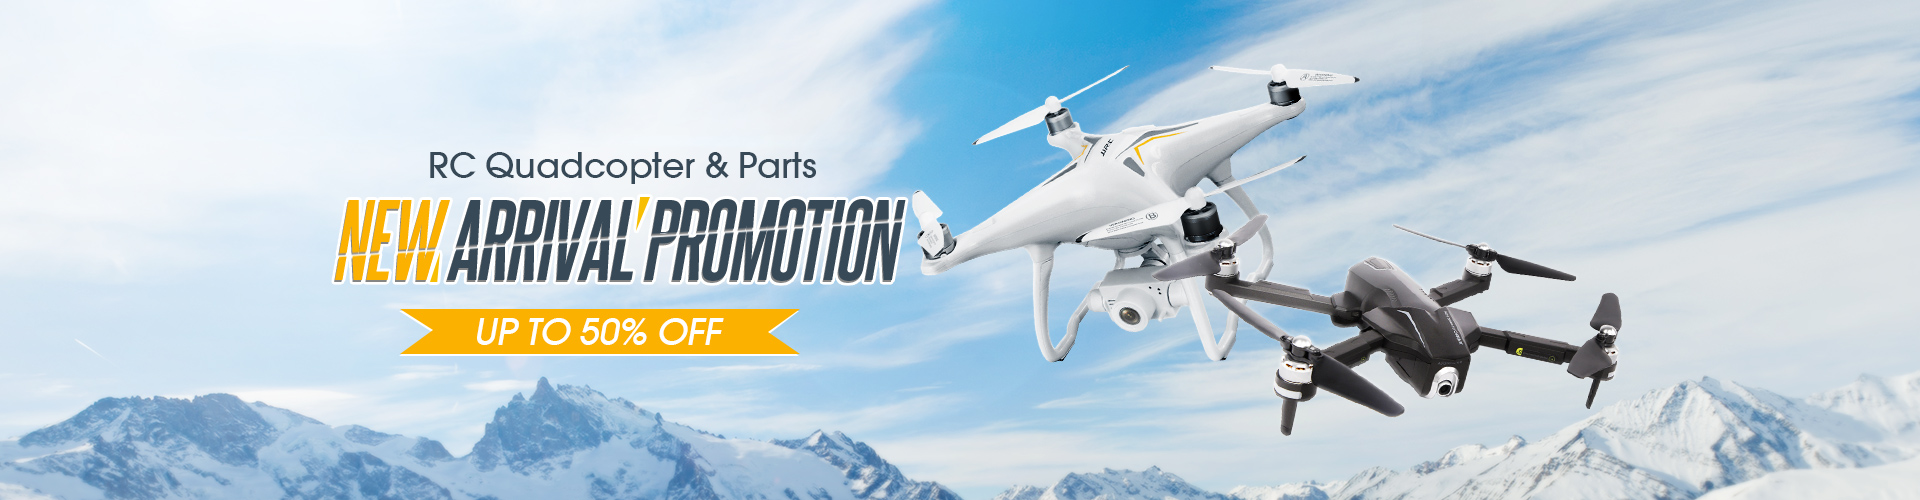 RC Quadcopter&Parts New Arrival Promotion Up to 50% OFF